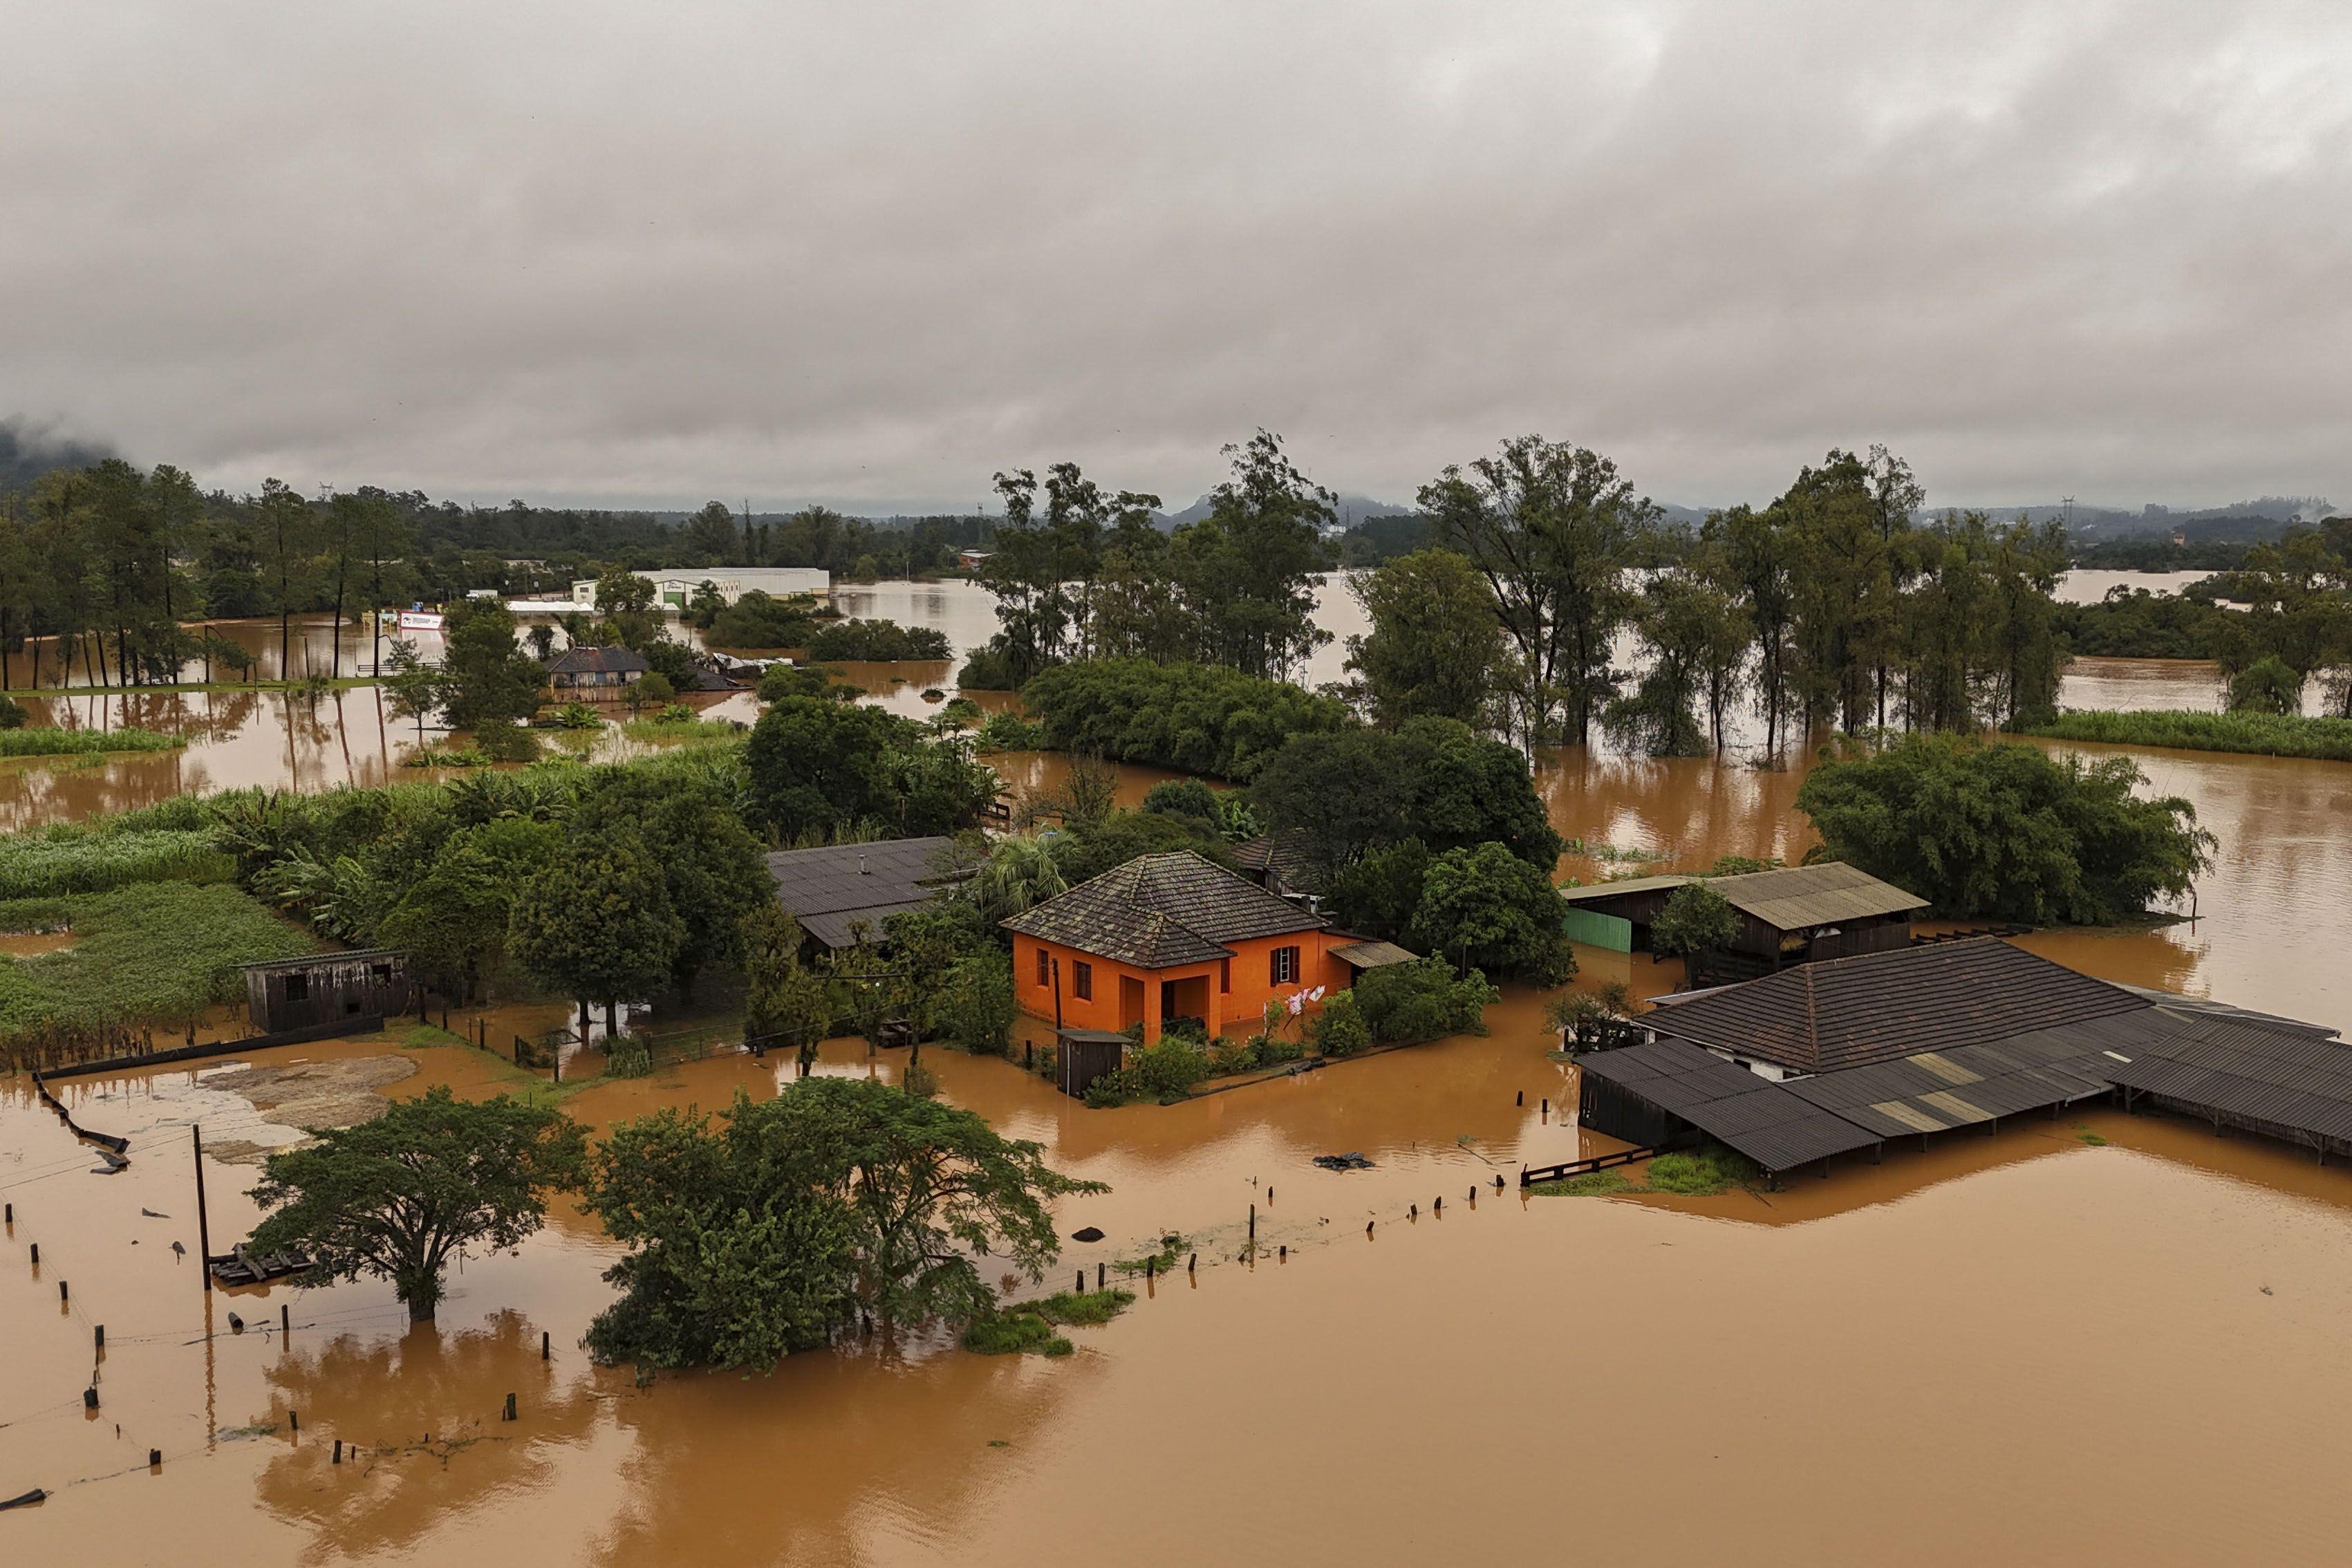 Dam collapse in Brazil leads to death of more than 30 people due to flooding